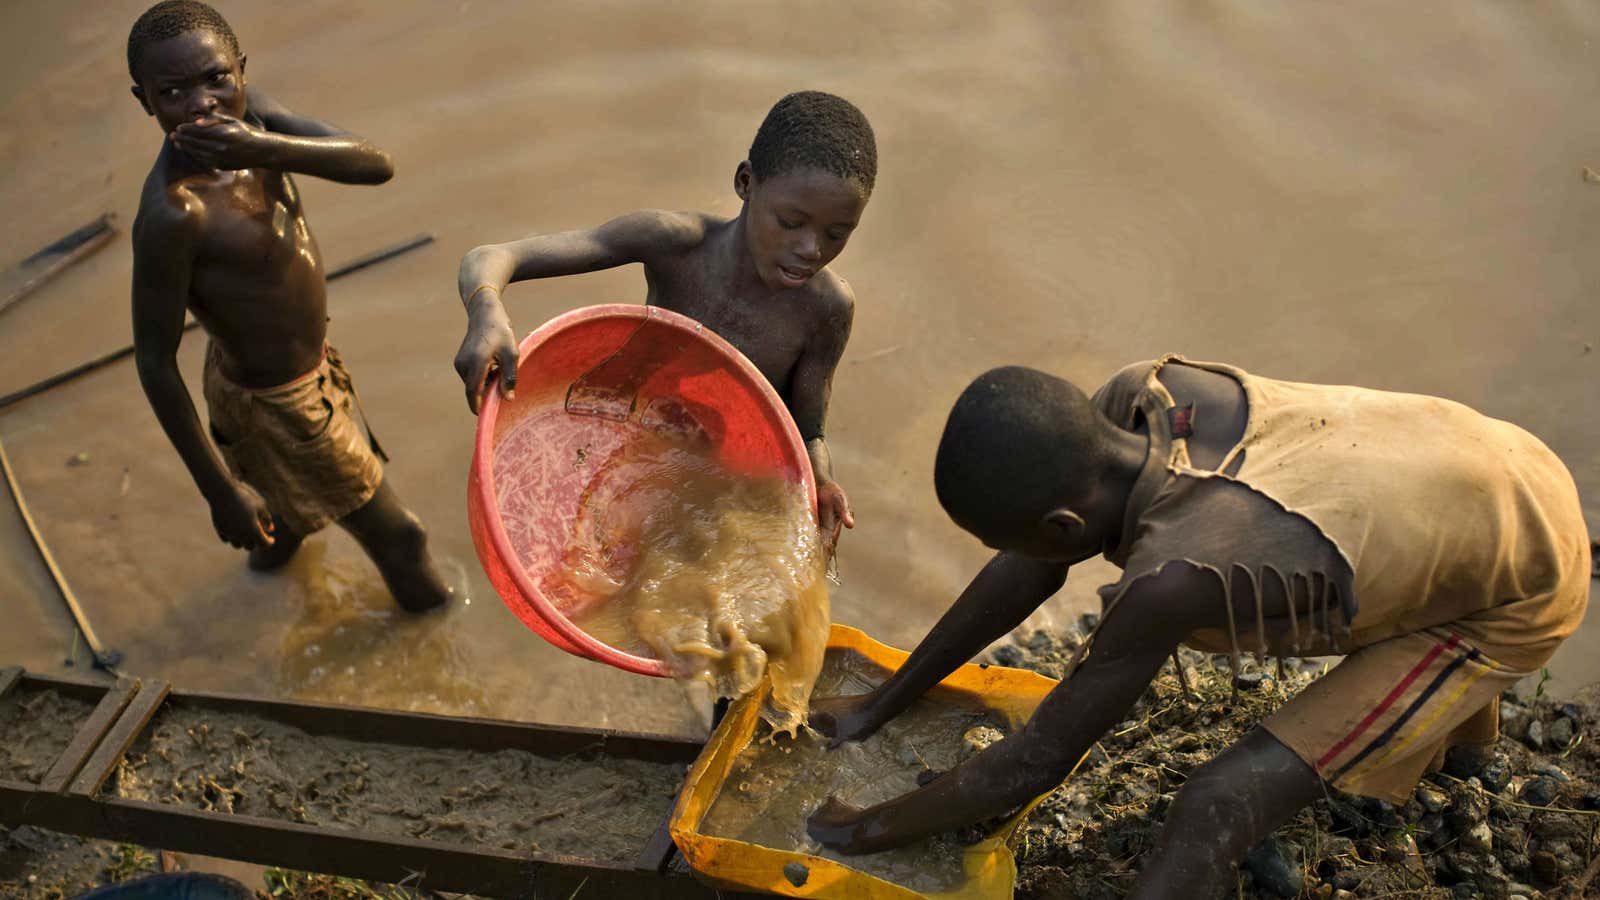 Boys pan for gold in the resource-rich Ituri region of eastern Congo.